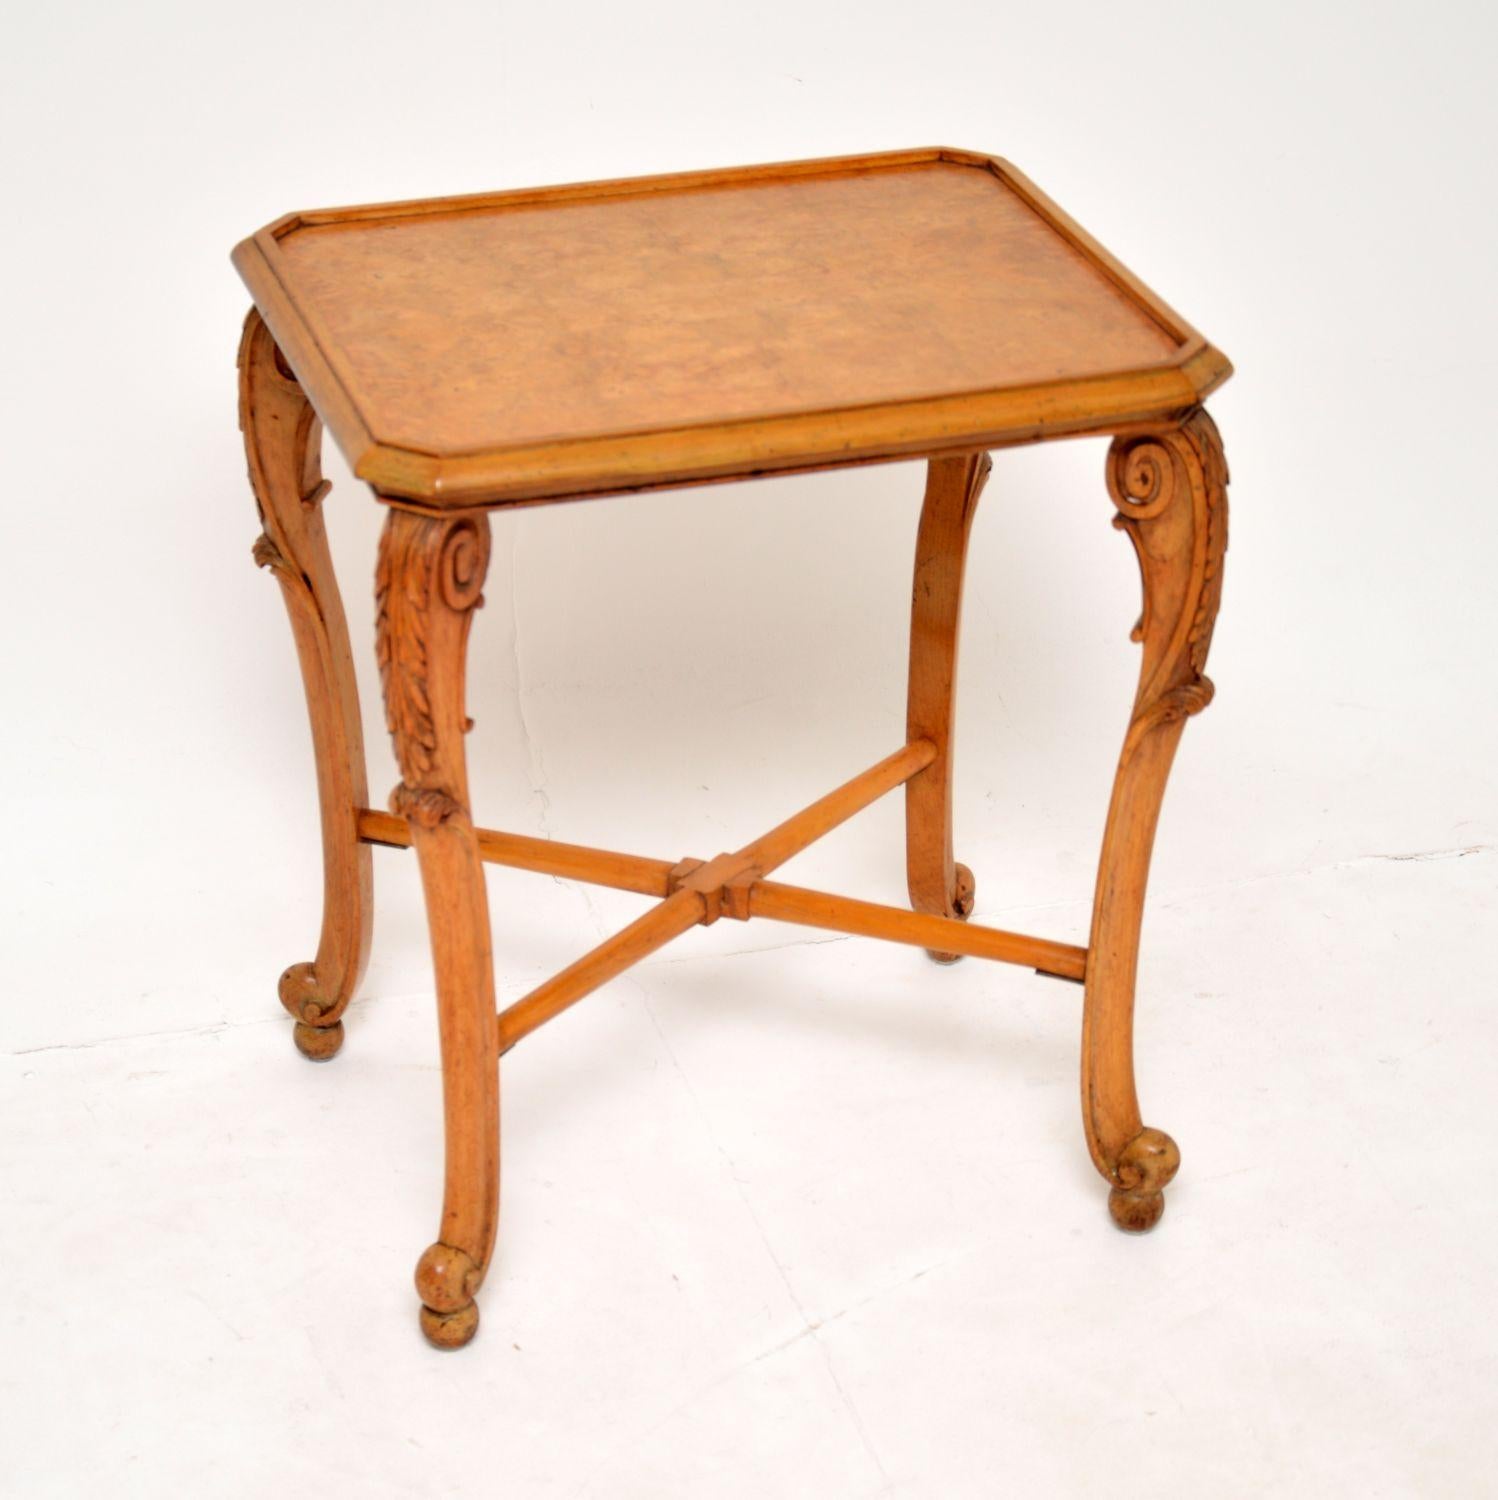 A lovely antique side table in burr walnut and carved walnut. This was made in England by Ray and Solomon Hille, it dates from the 1930’s.

It is beautifully made and is a useful size for use as an occasional side table or lamp table. There is a